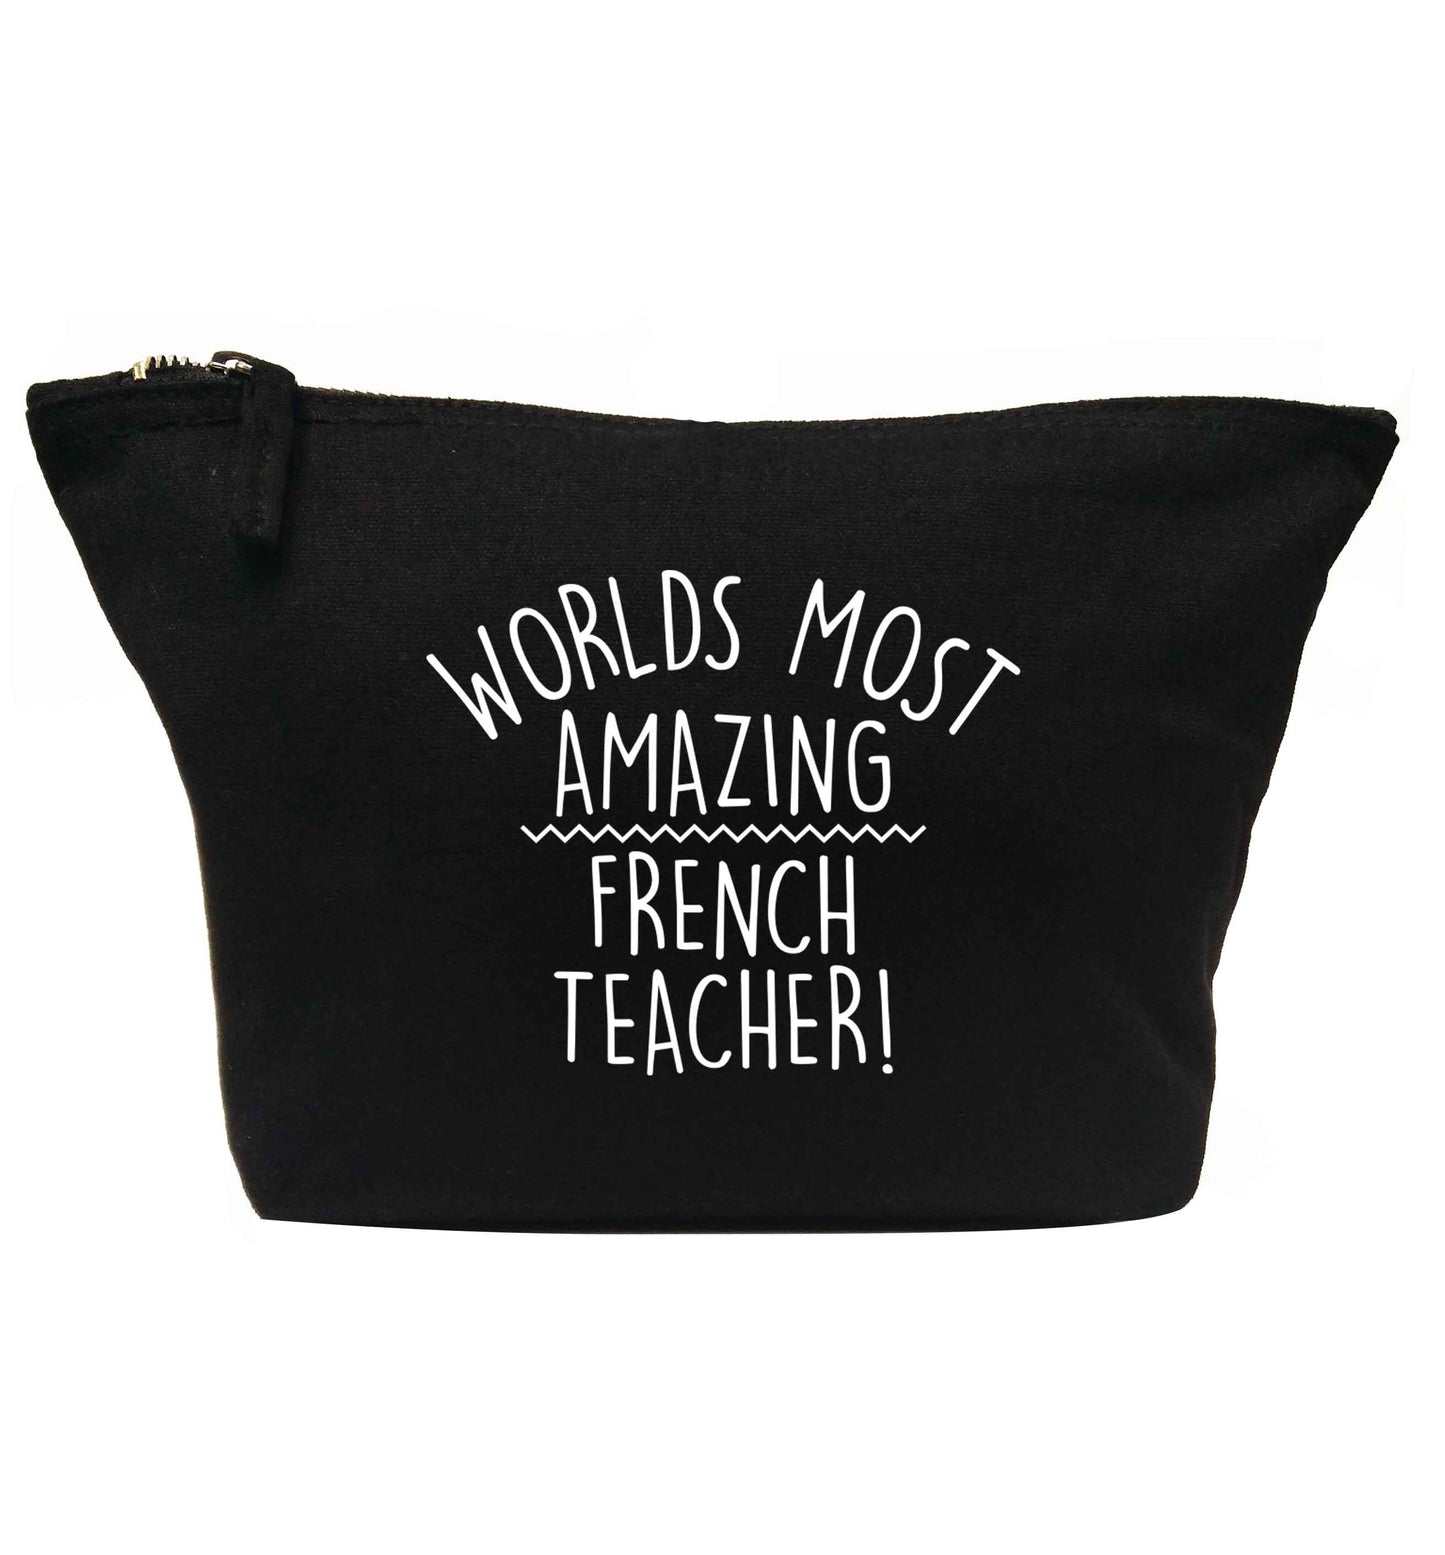 Worlds most amazing French teacher | Makeup / wash bag